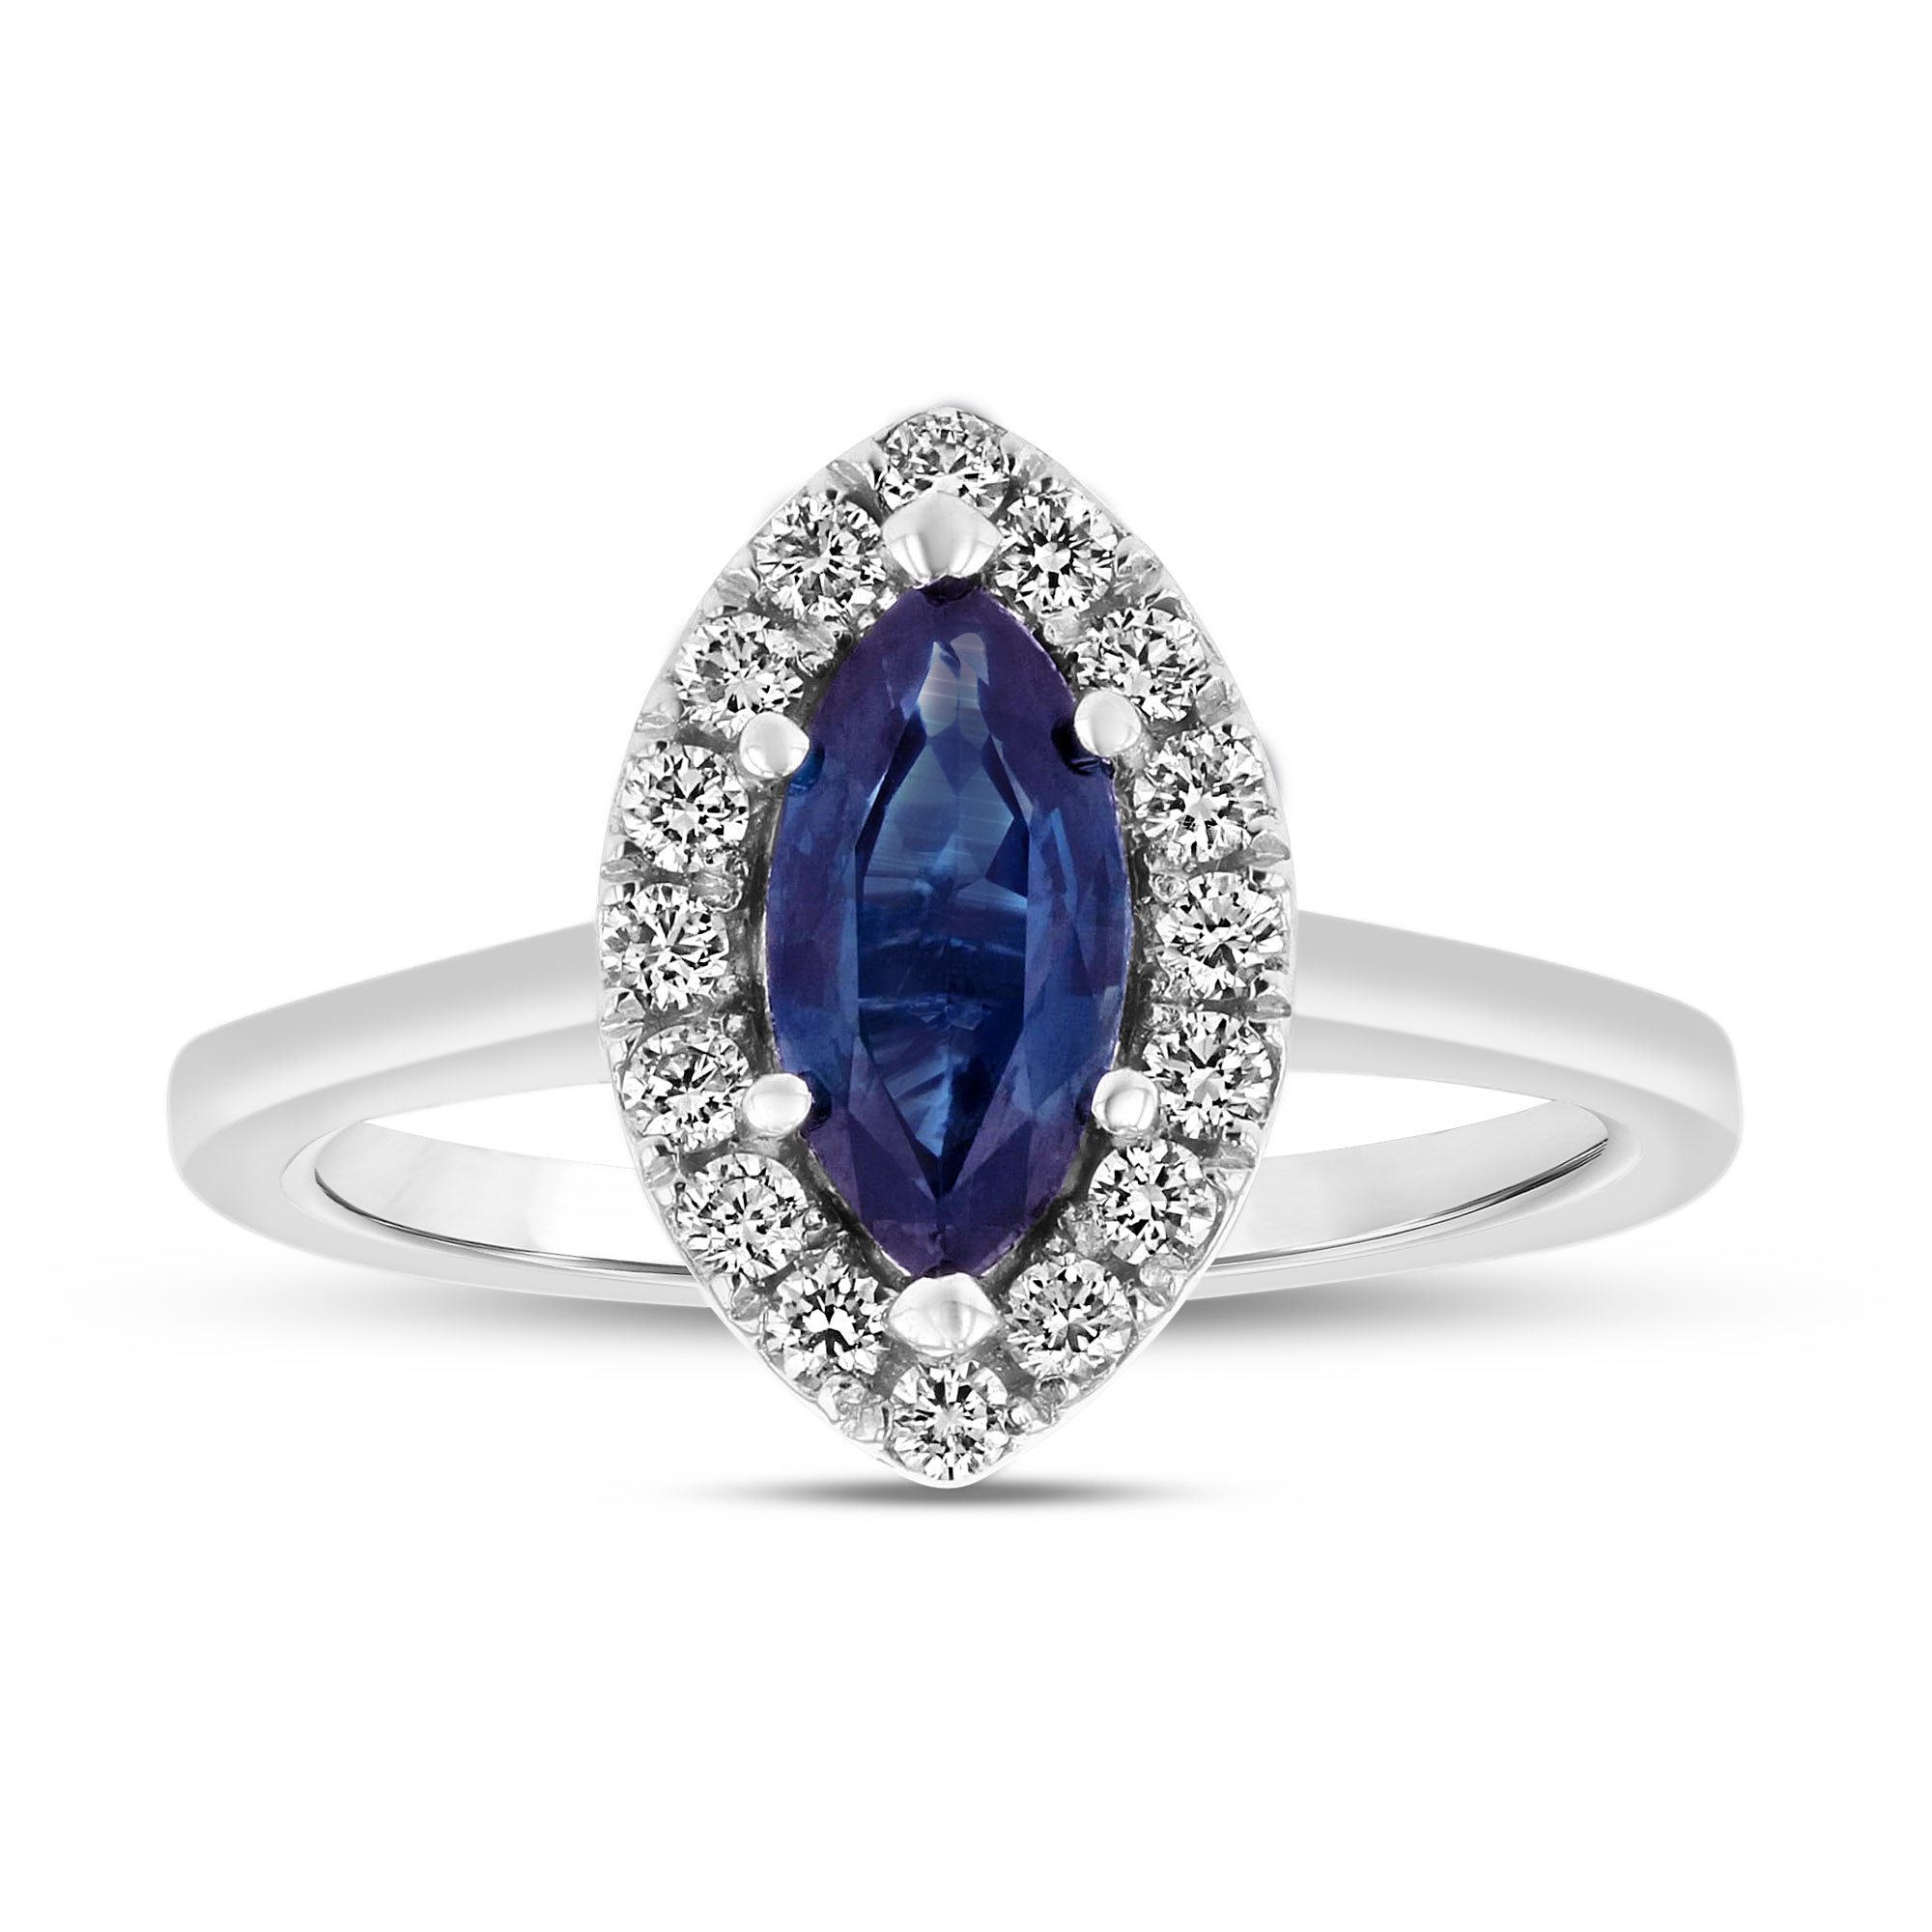 View 1.37ctw Diamond and Sapphire Ring in 14k White Gold